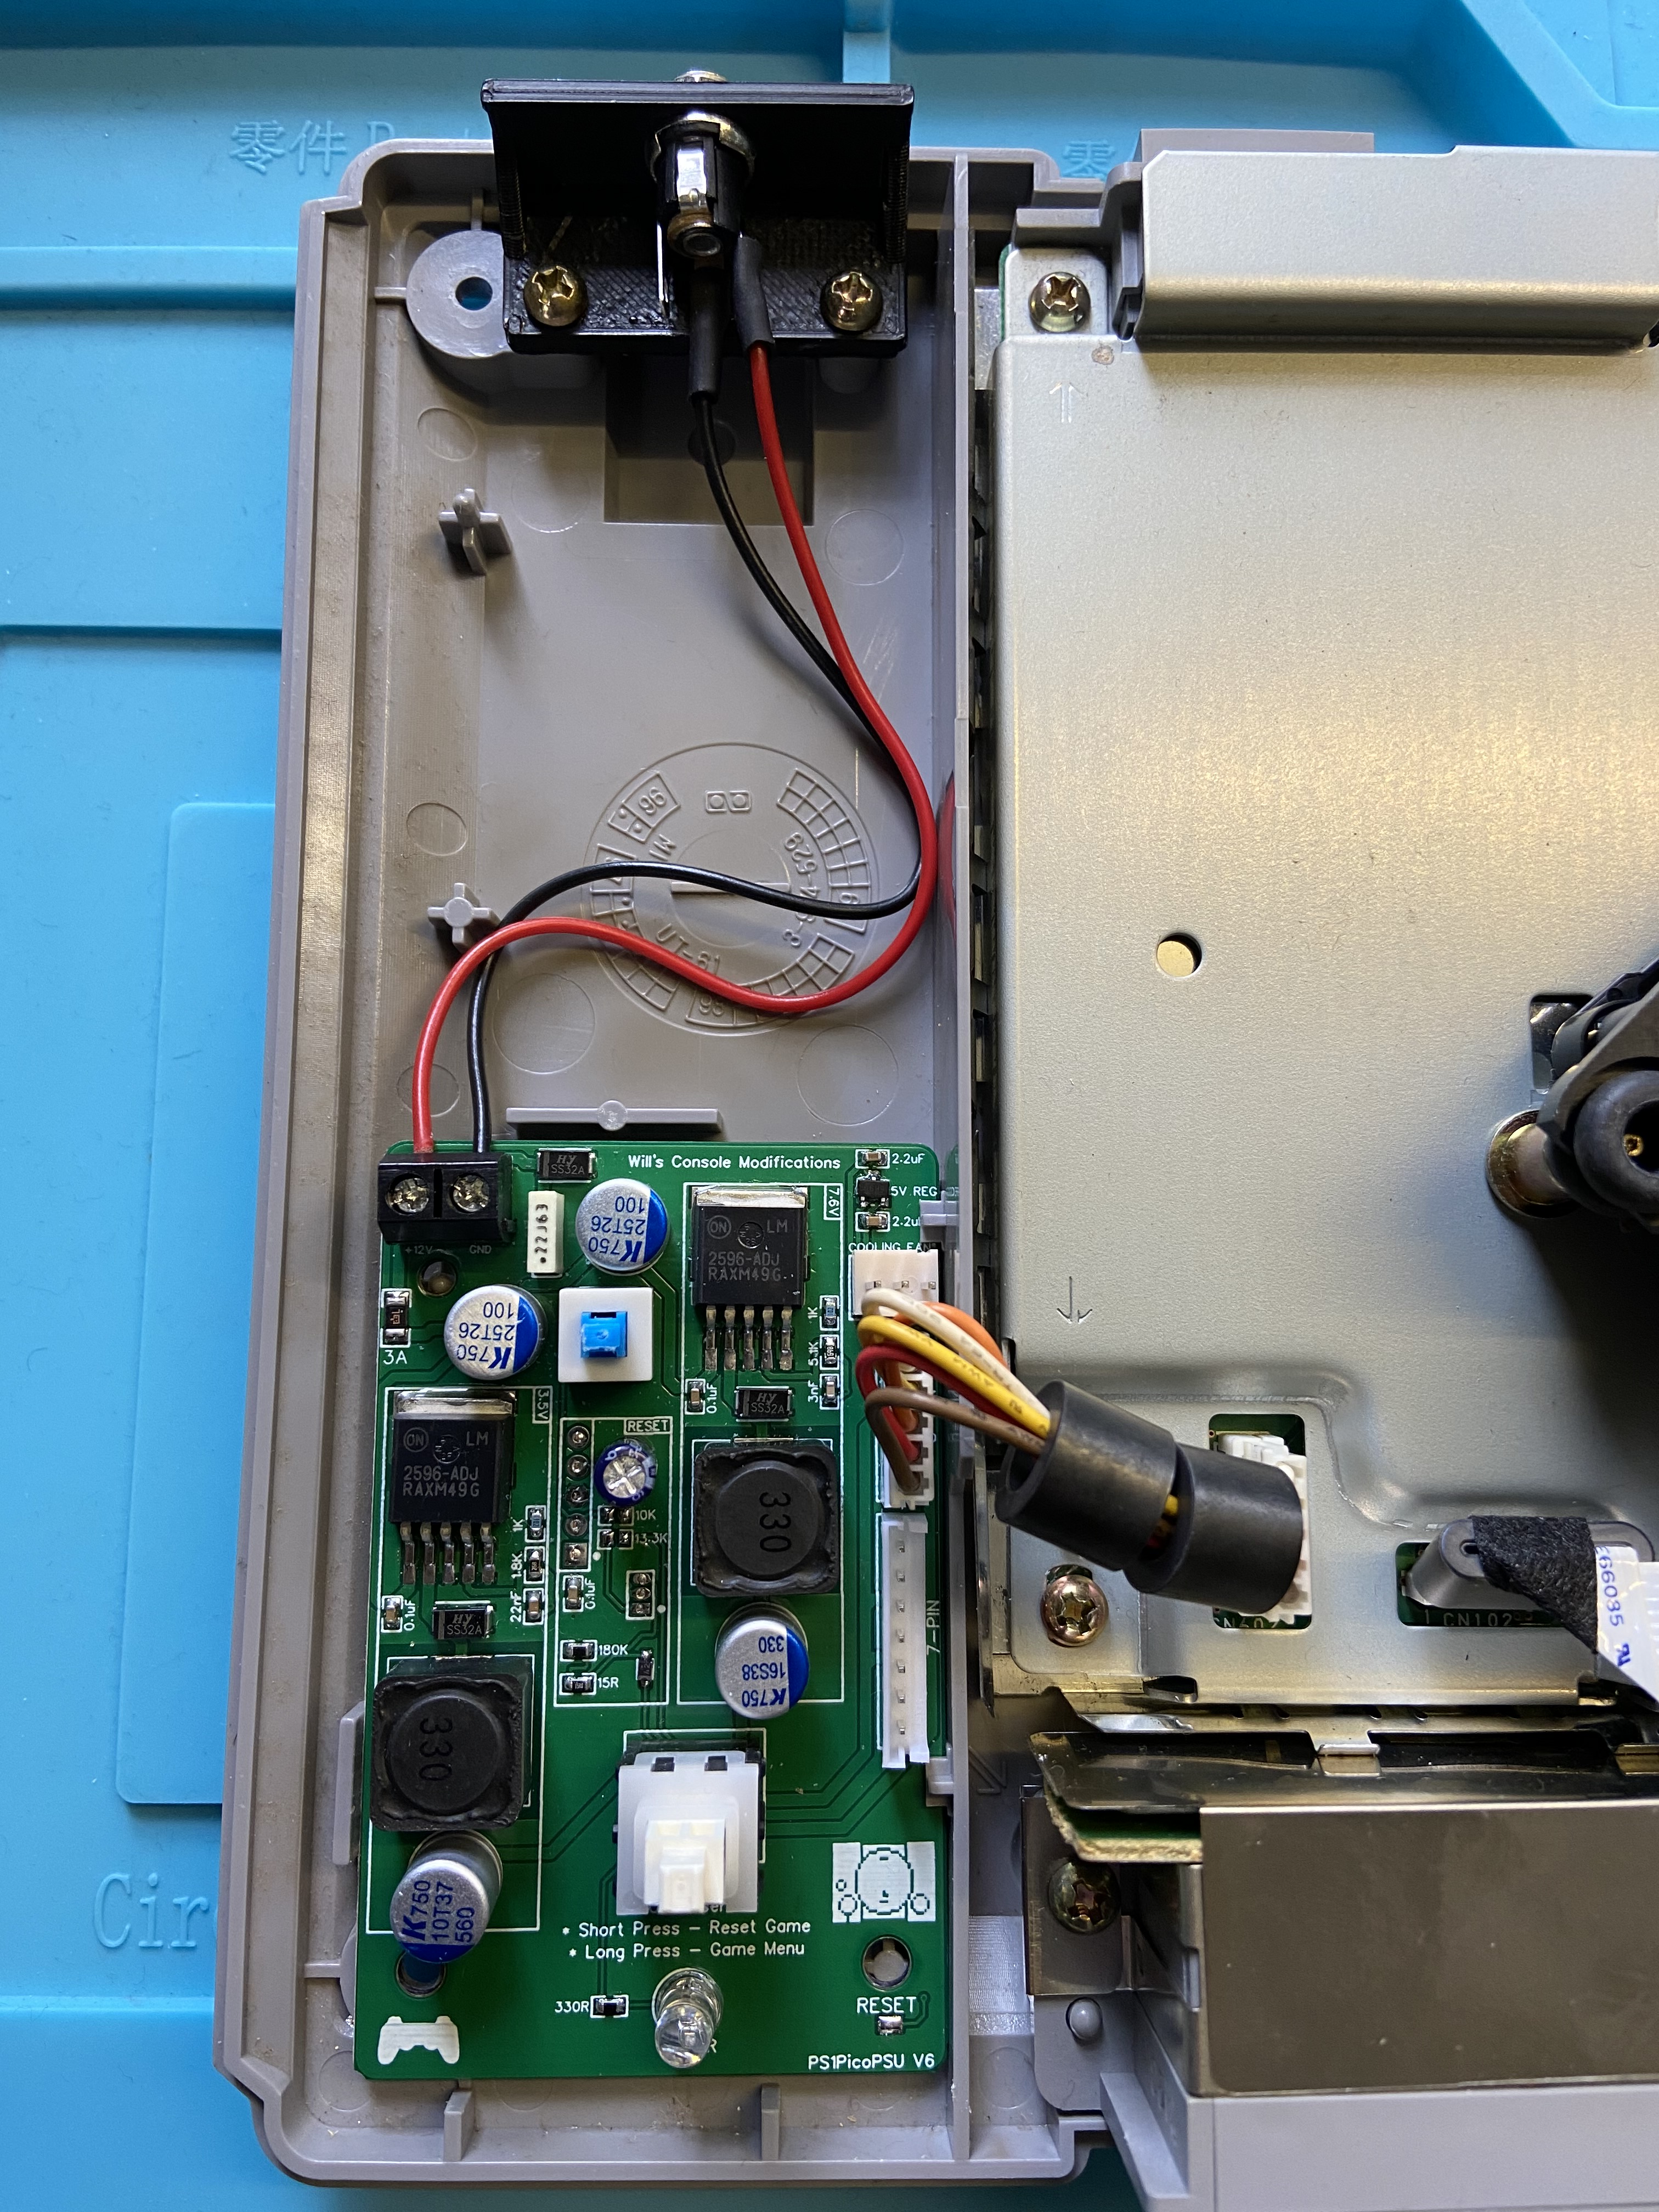 Aftermarket power supply installed in a PlayStation